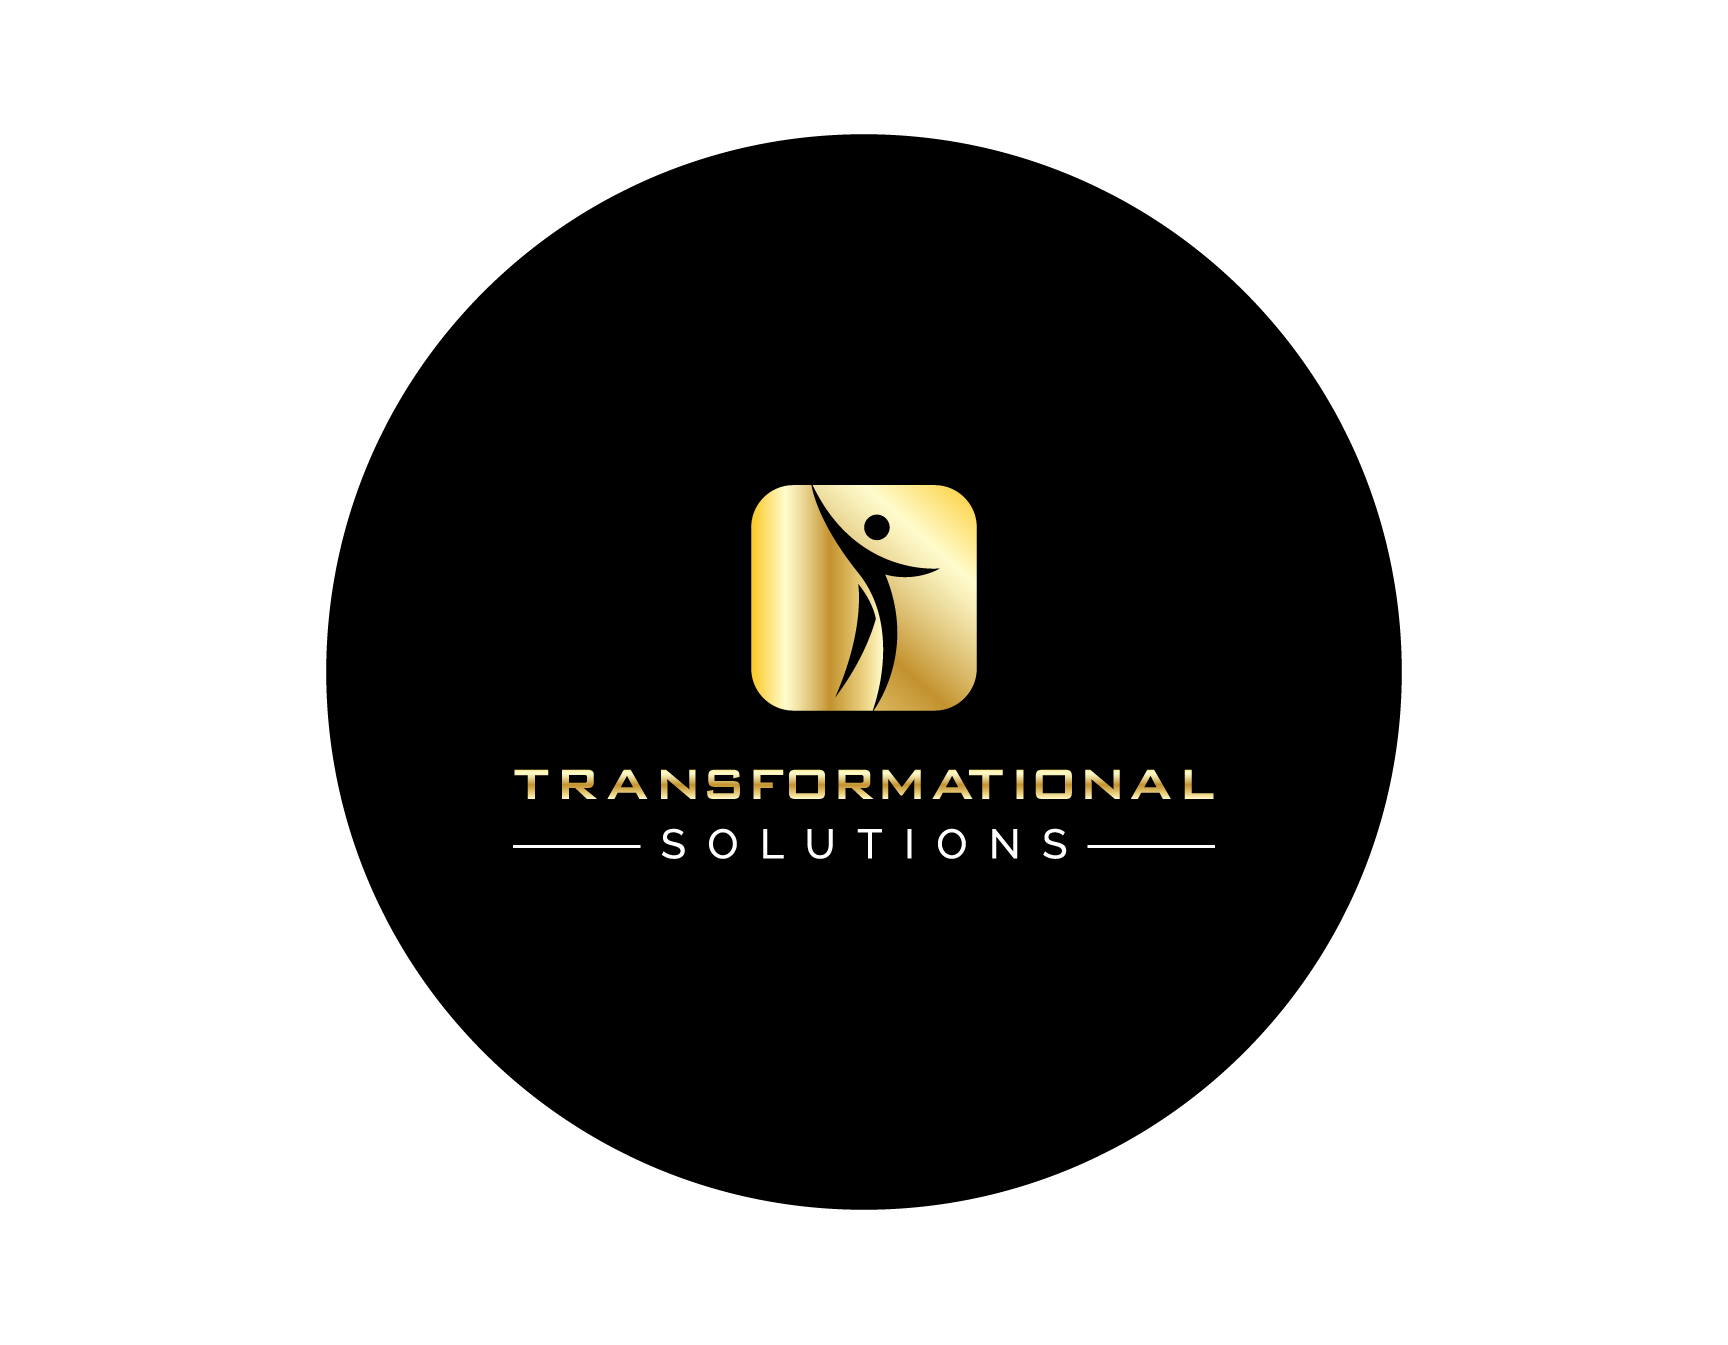 Make Transformation Possible - Transformational Solutions